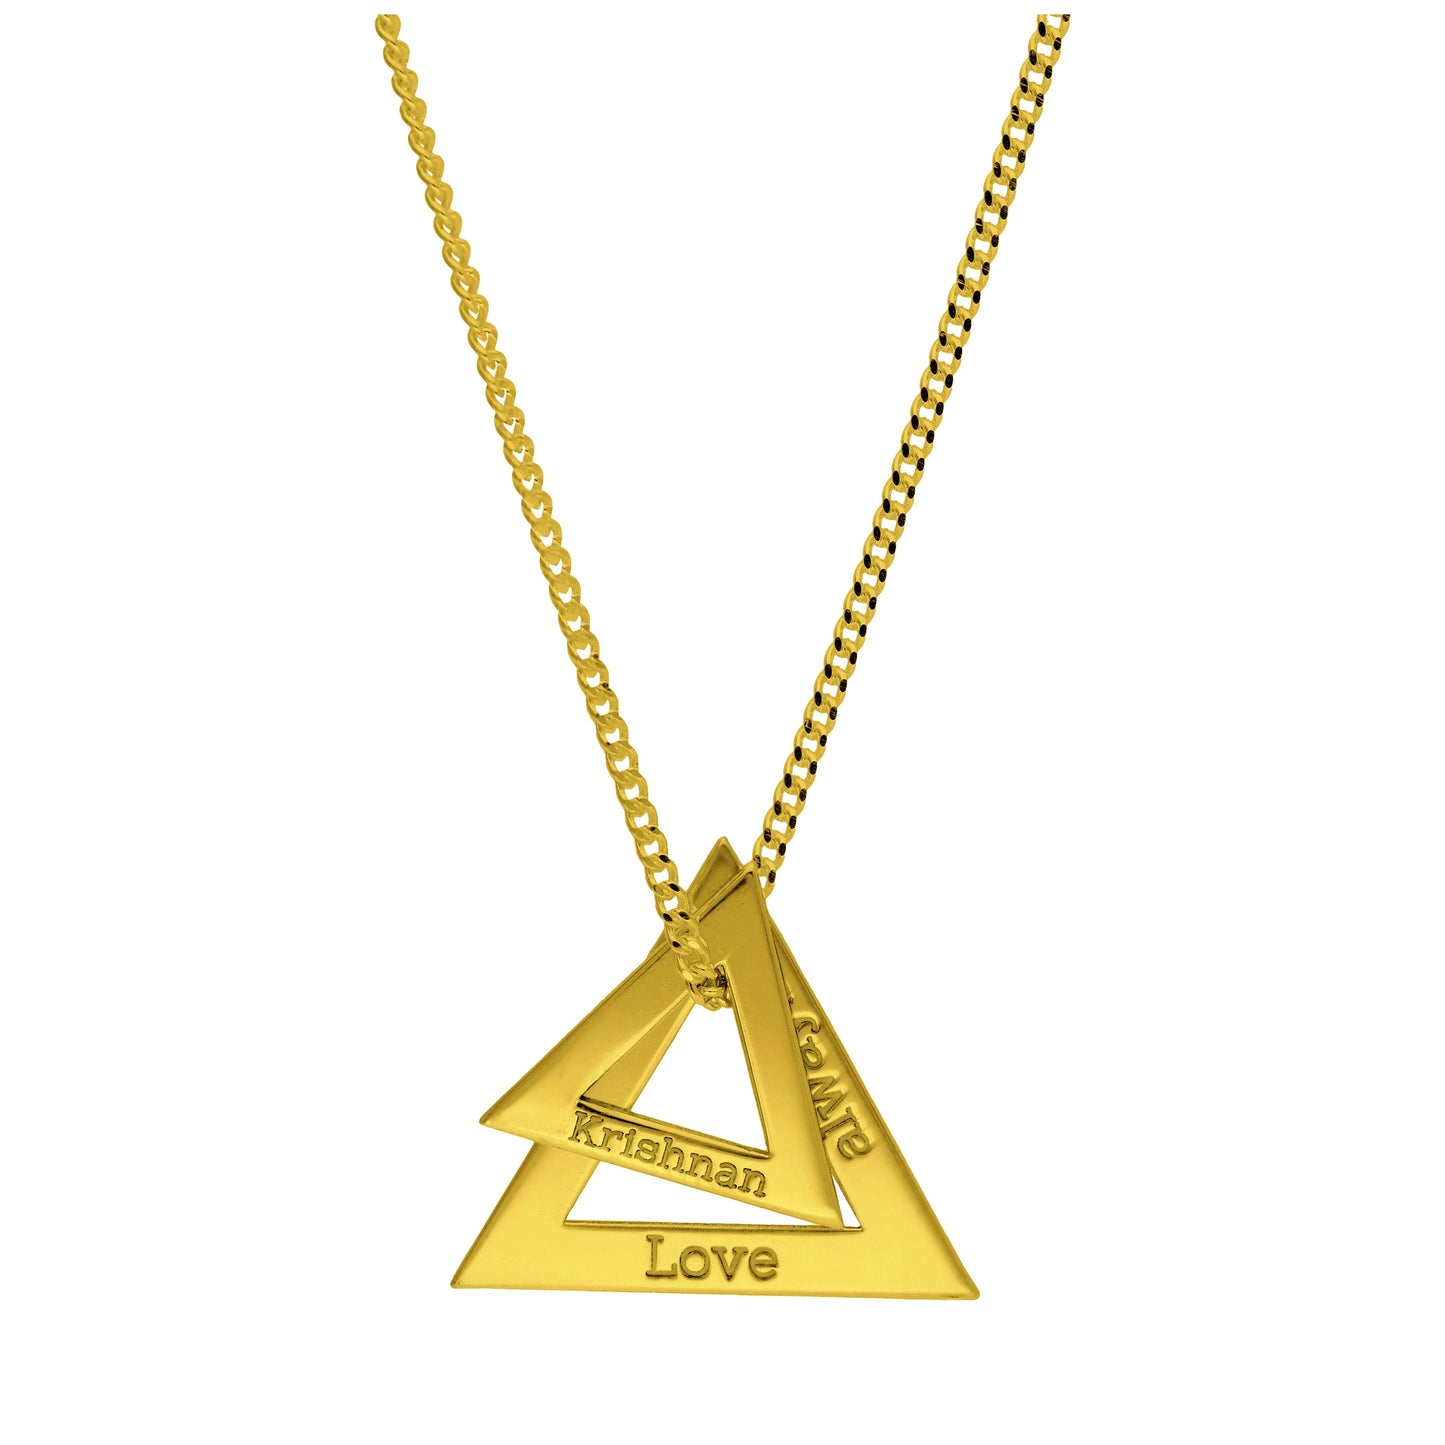 Bespoke Gold Plated Sterling Silver Double Triangle Name Necklace 16 - 24 Inches